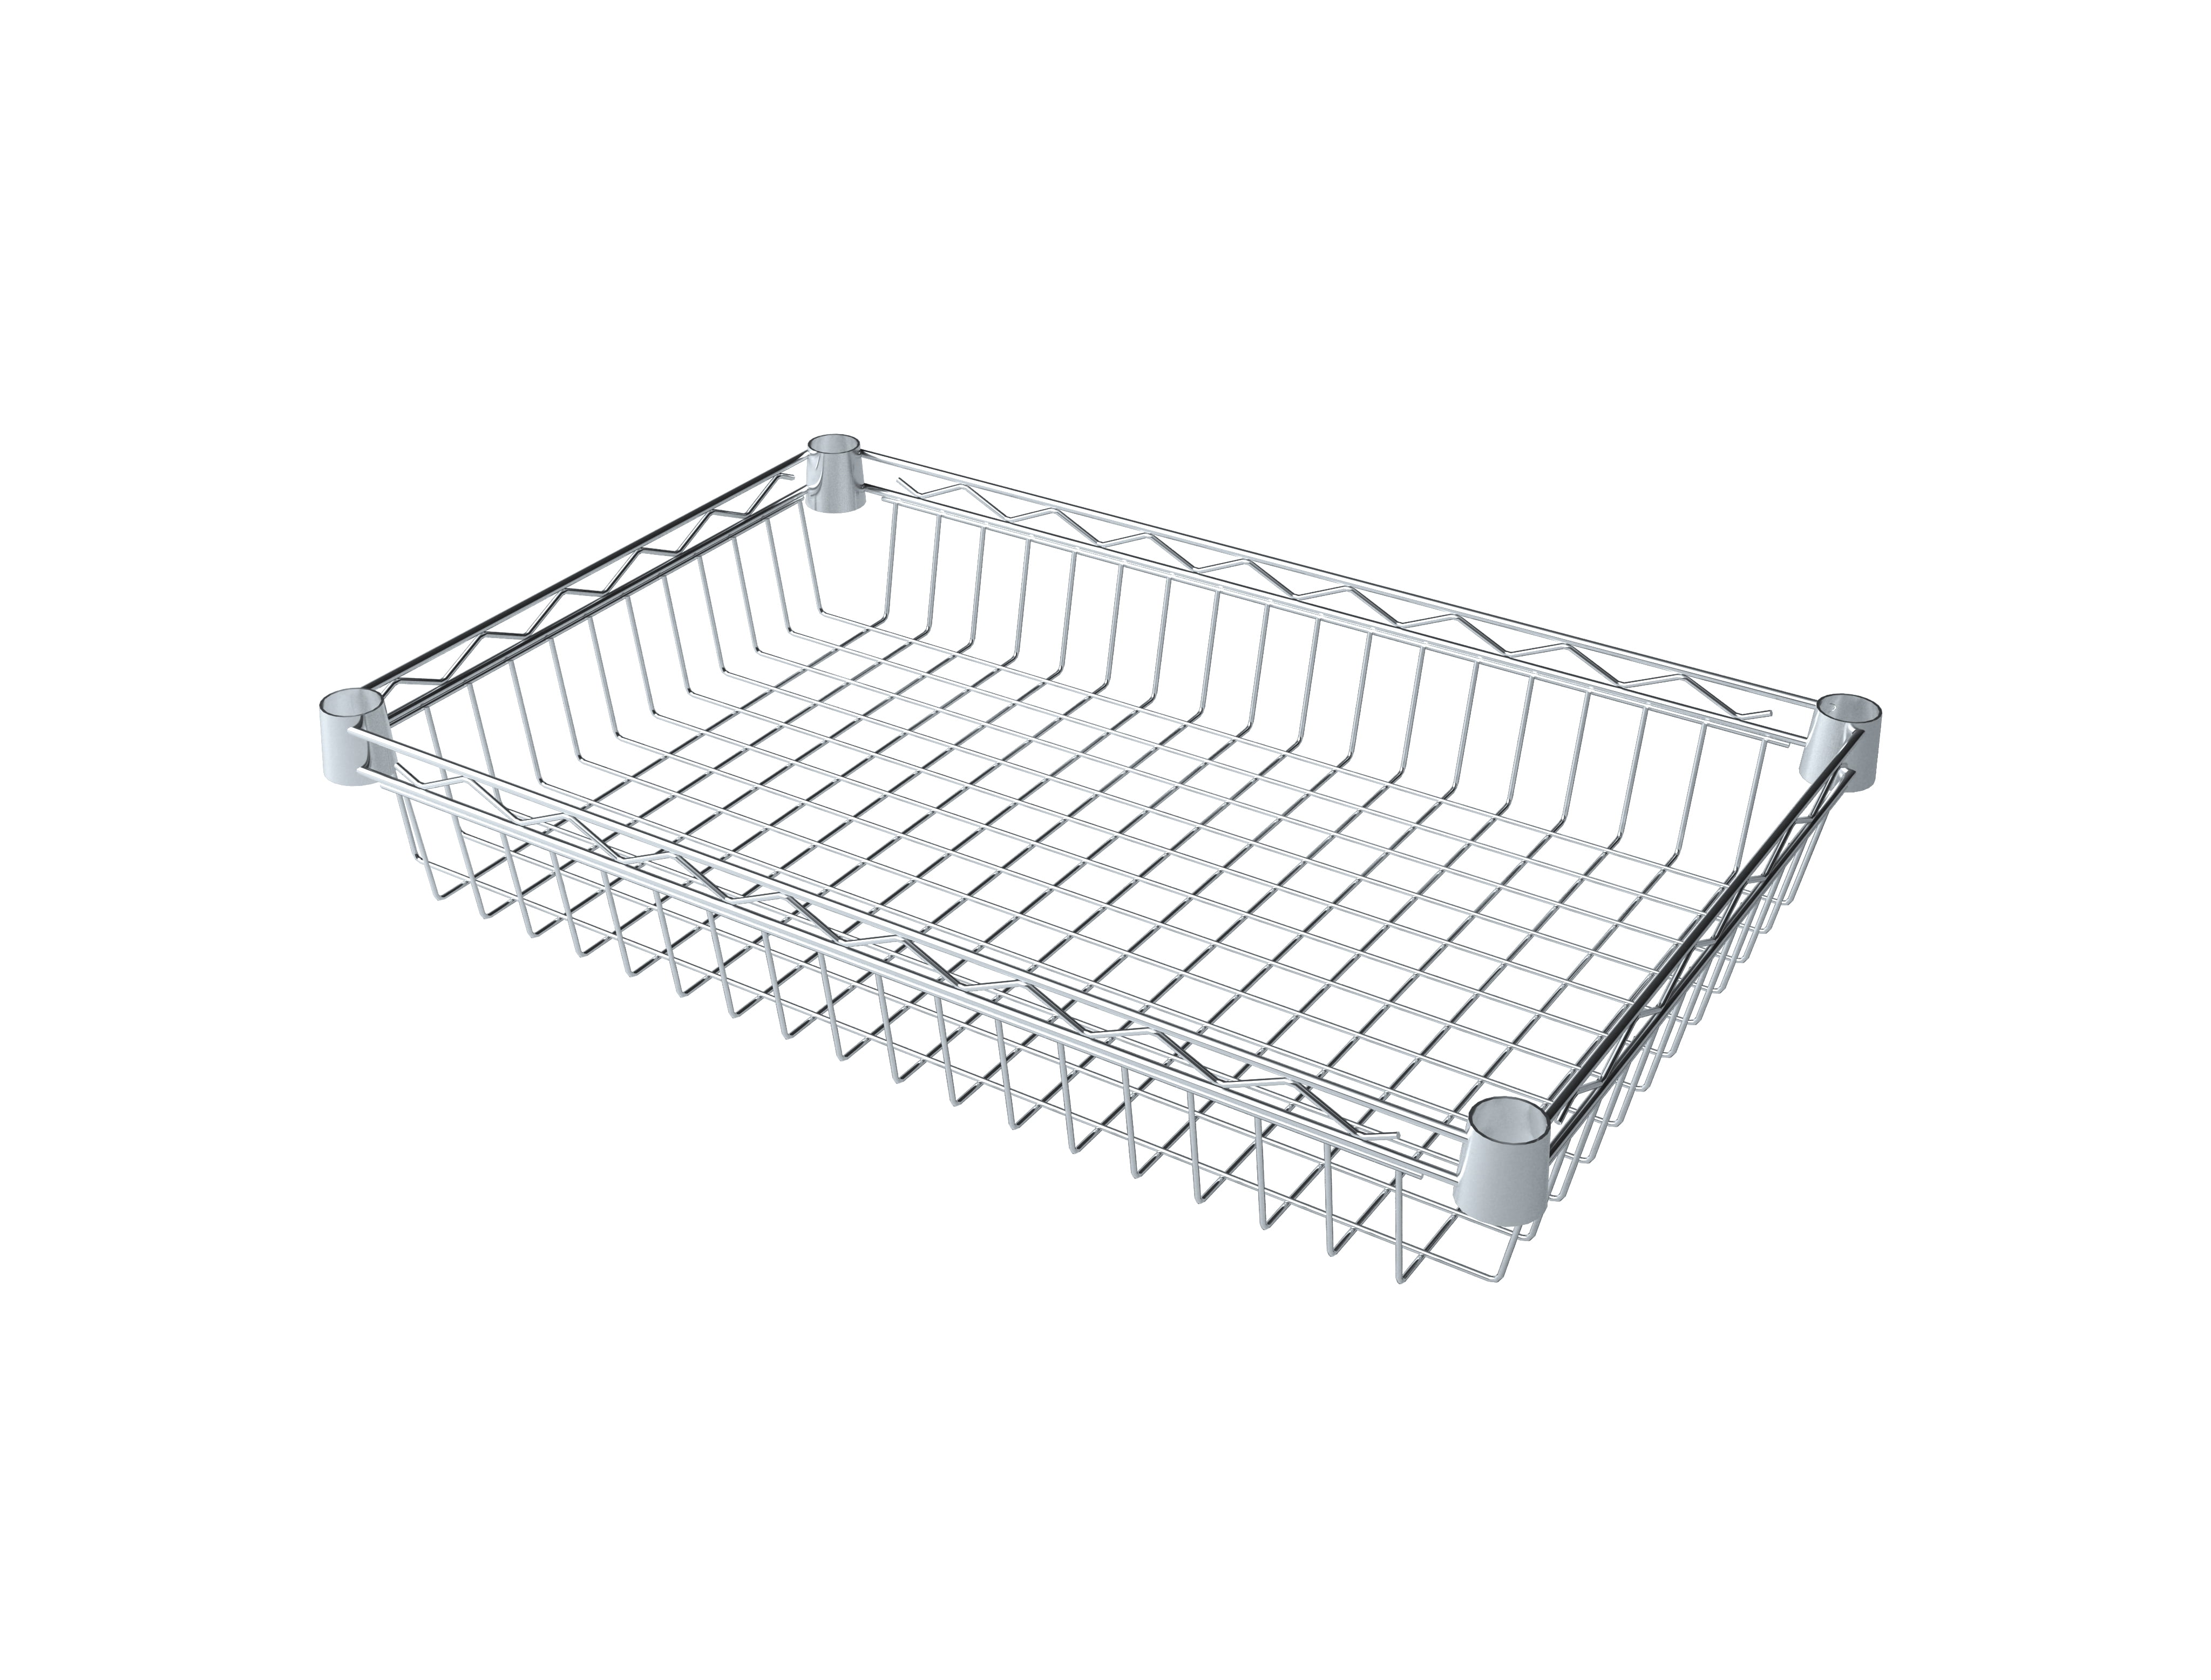 Hss Wire Shelving Extra Basket 16, 24 Deep Wall Mounted Wire Shelving